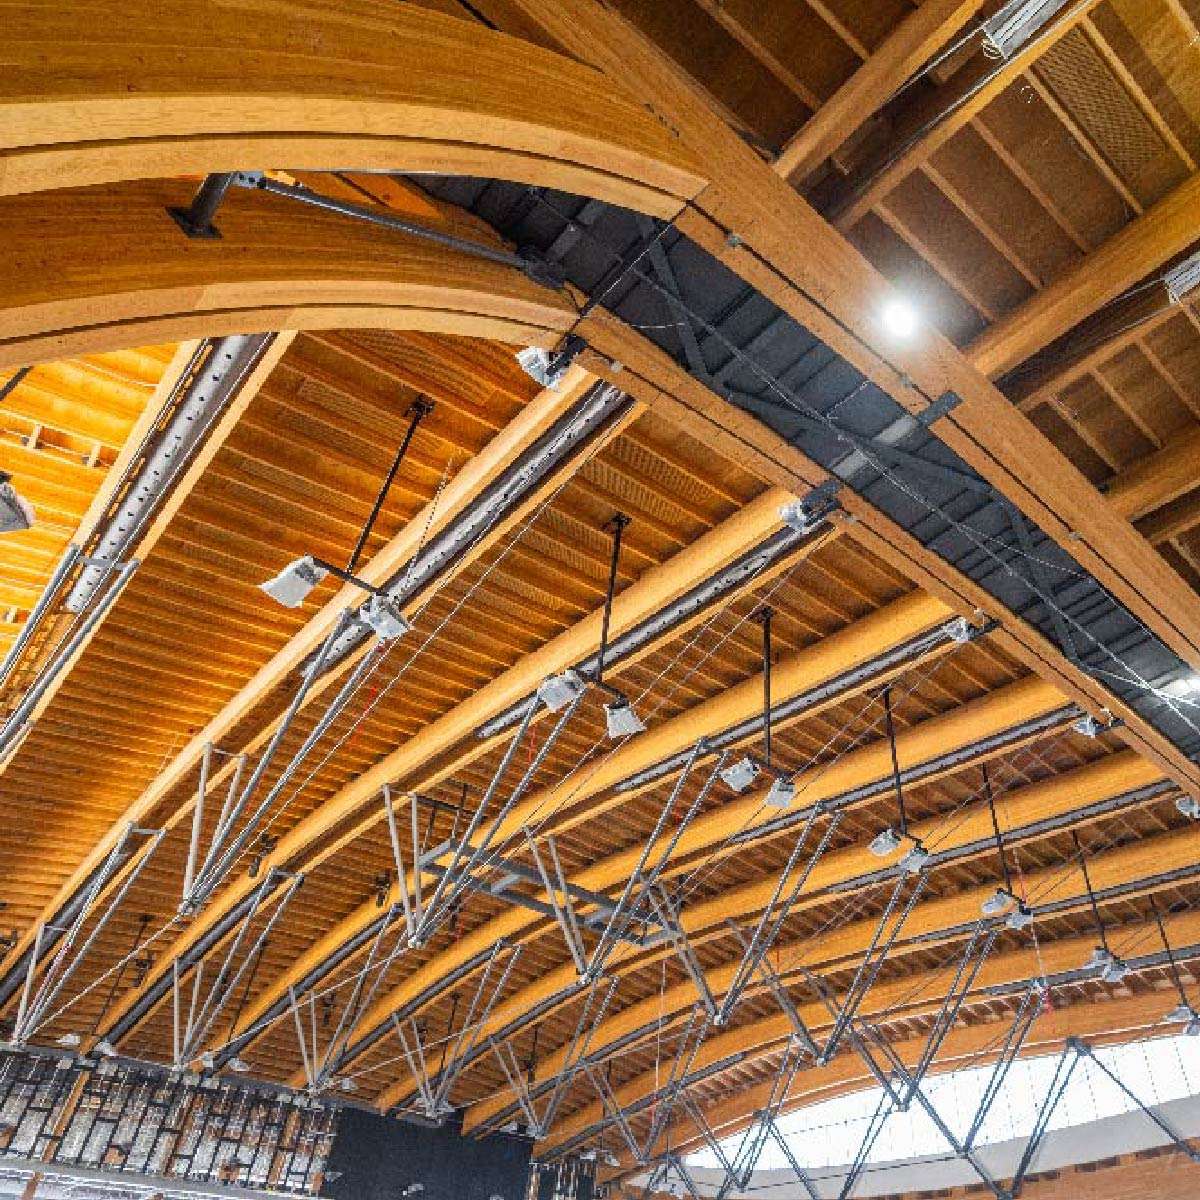 A view of the wood roof inside the ICCU arena.